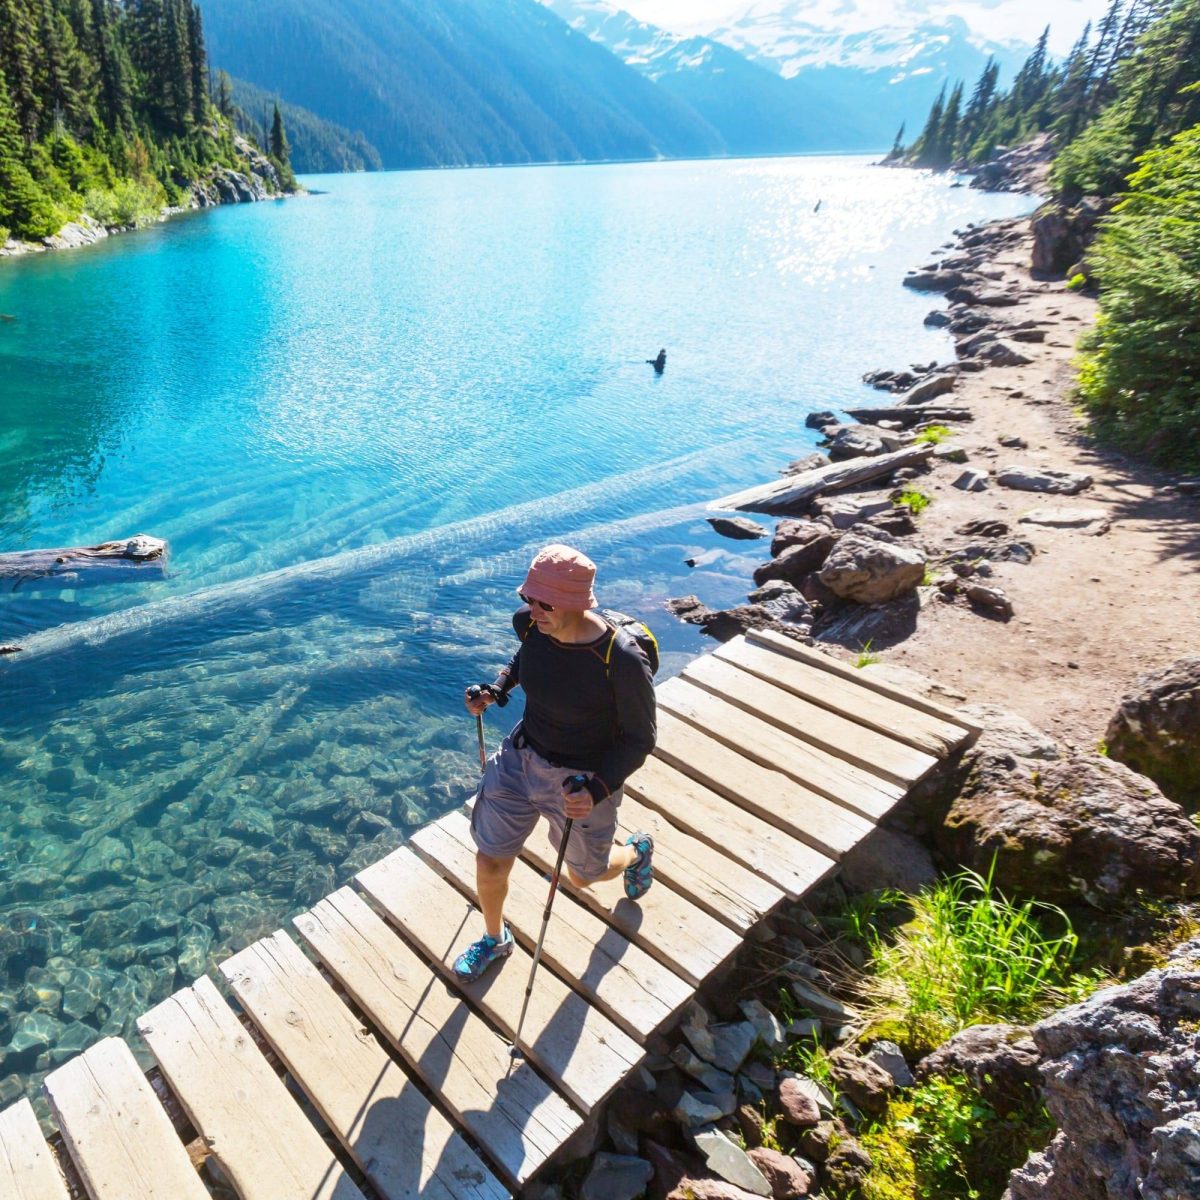 Explore outdoors and hike alongside a turquoise clear lake with mountain views in Vancouver, BC